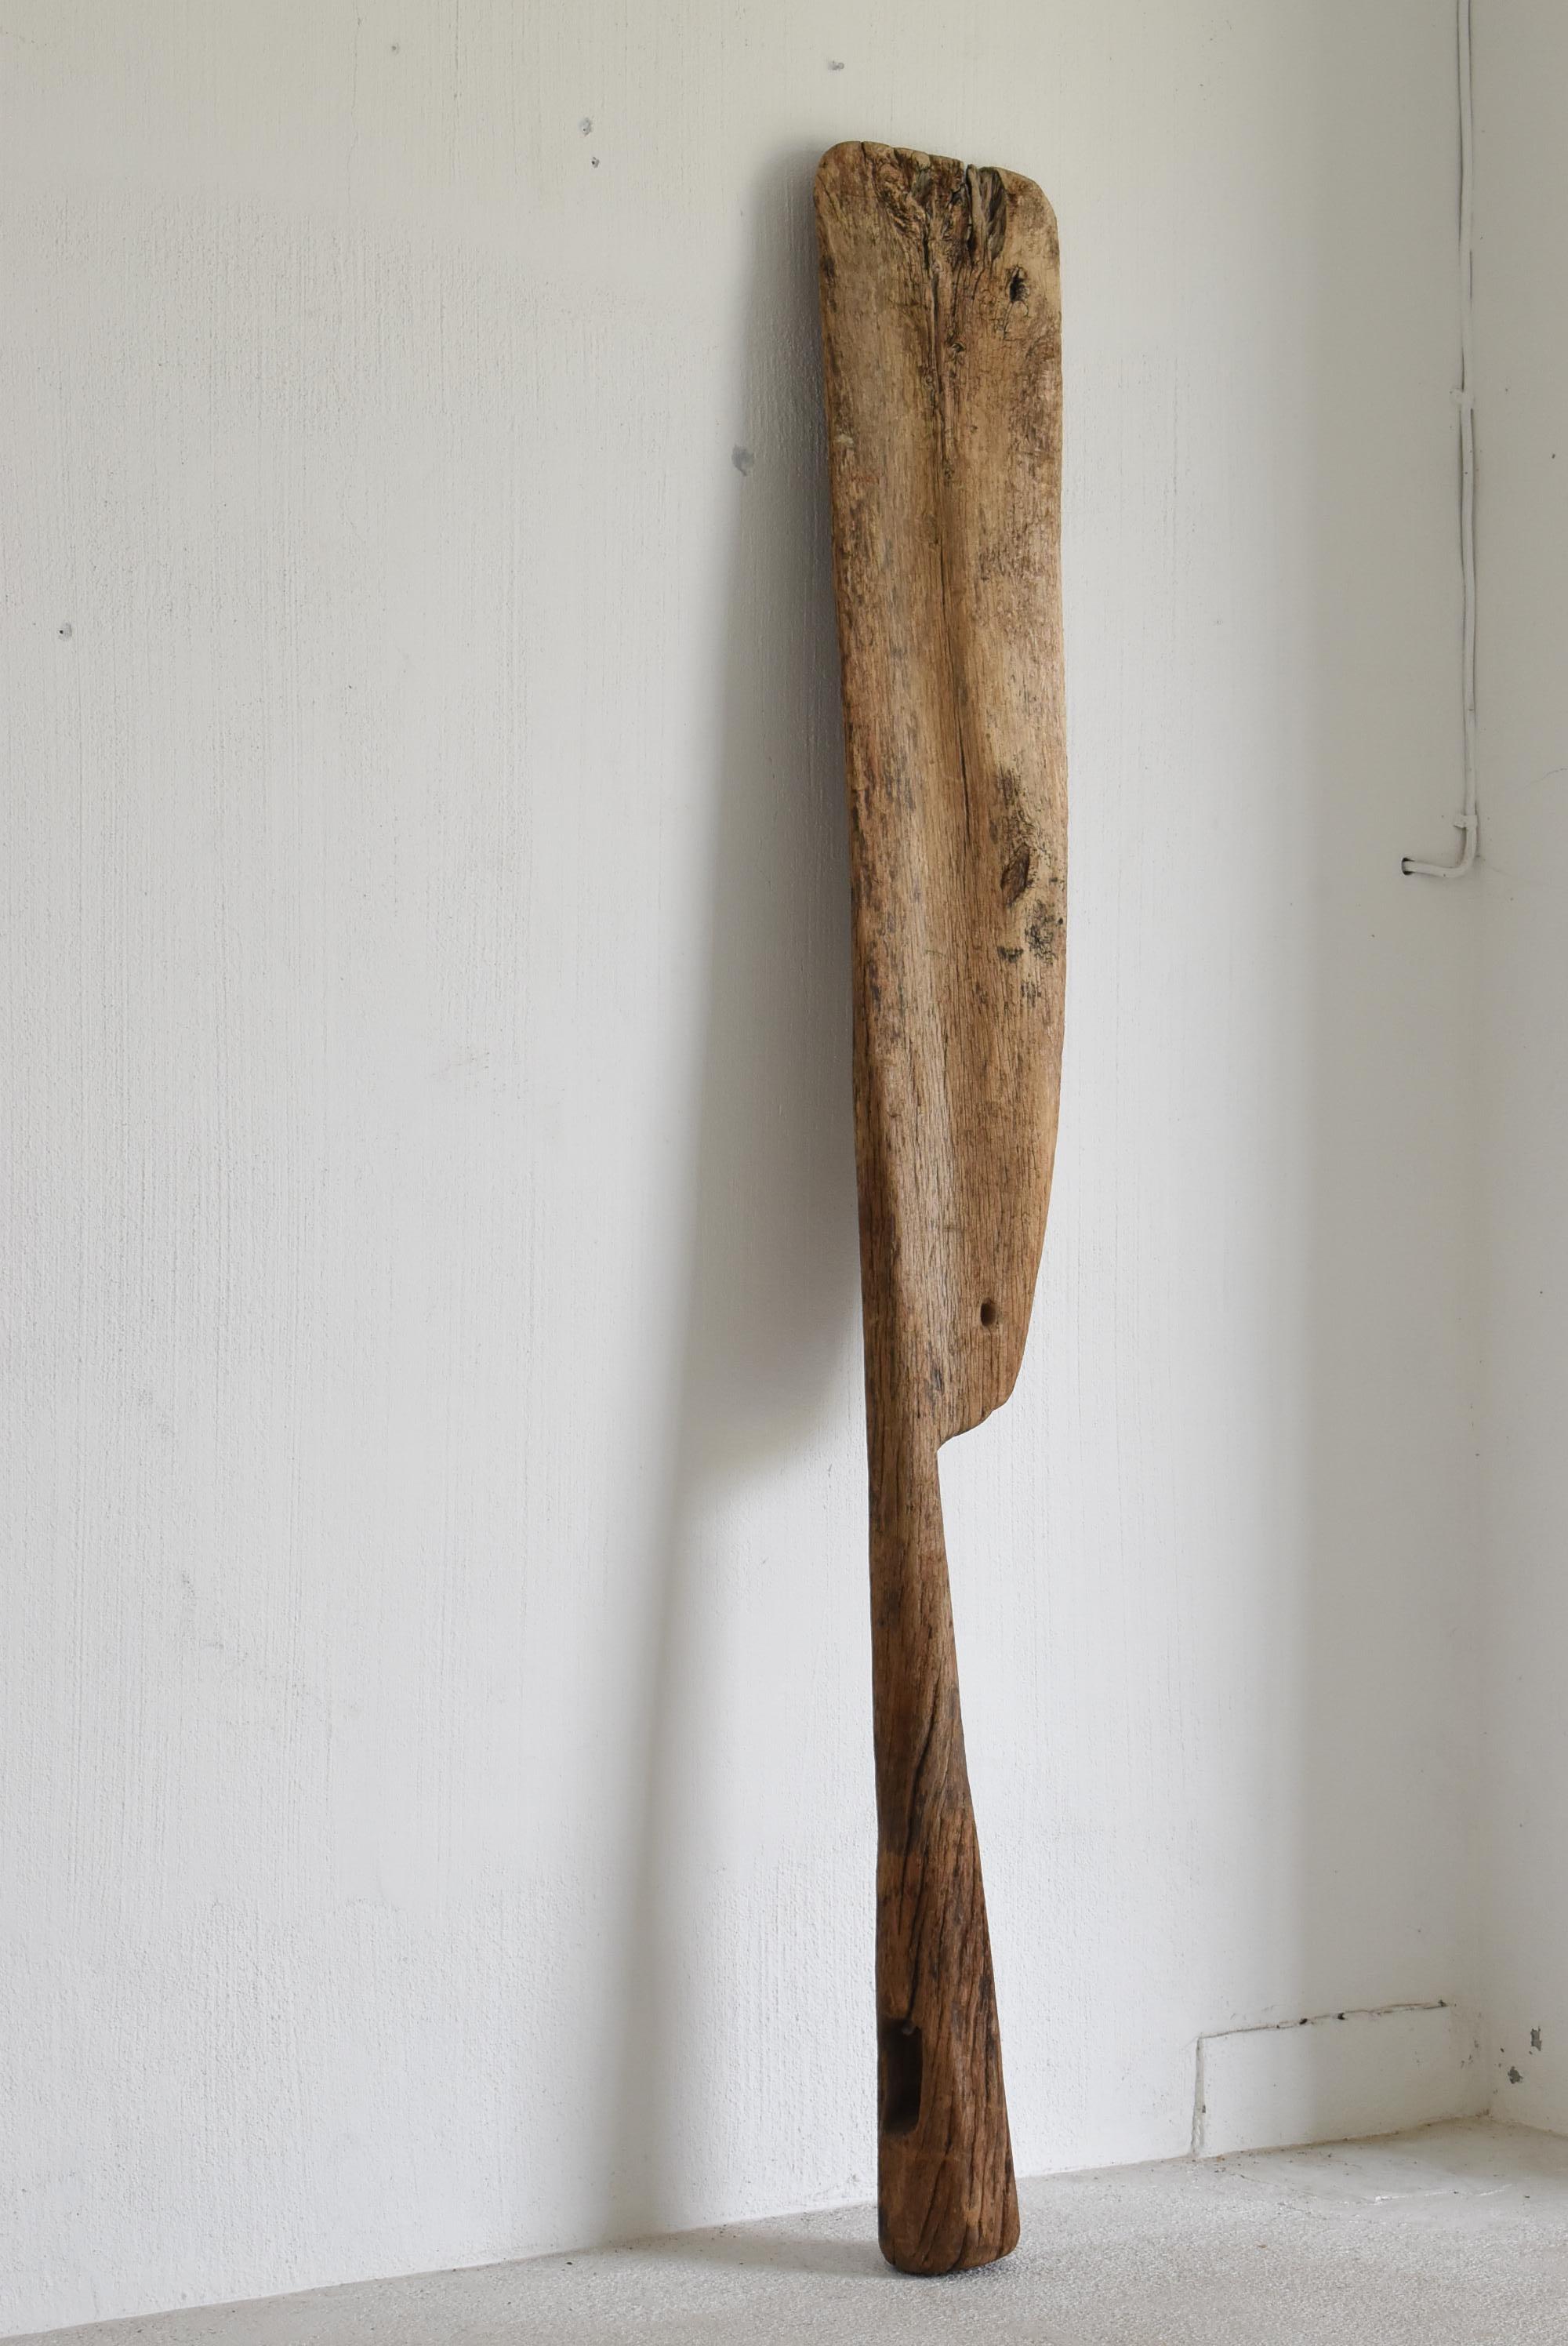 These are the oars of an old Japanese ship.
It is from the Edo period (1800s-1860s).
It is made of oak wood.
It is a very rare item.

Carved from a large oak tree.
It is dynamic and has presence as an object of art.

Highly recommended.

Weight